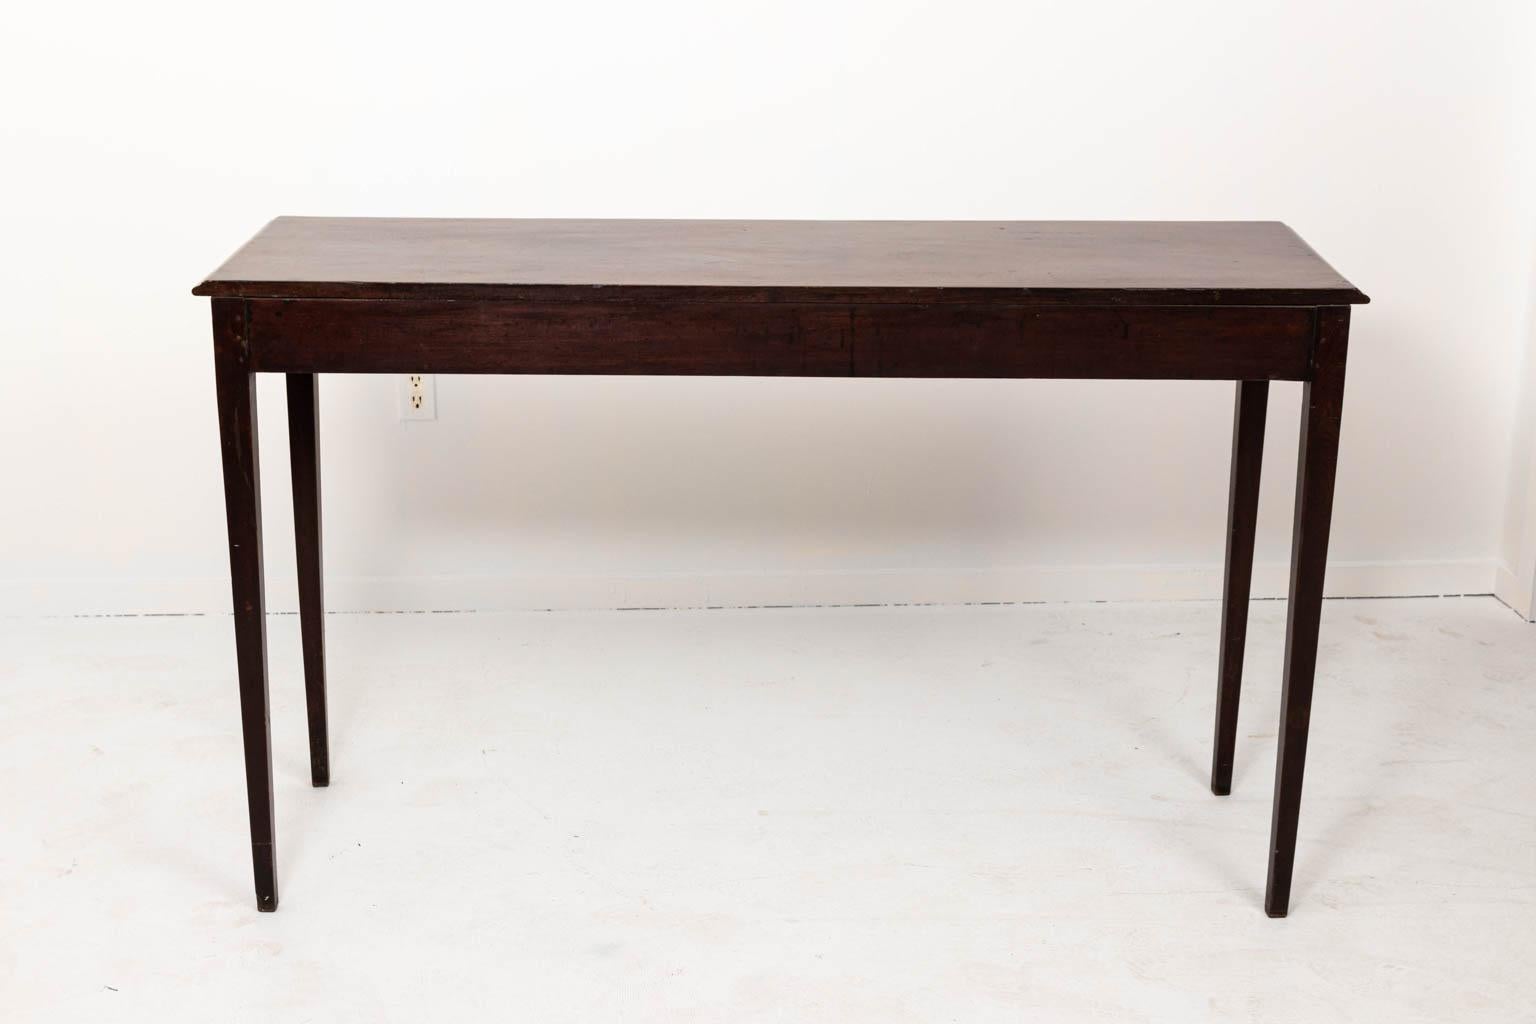 English Georgian mahogany console table with plain tapered legs, circa early 19th century. Please note of wear consistent with age including minor chips.